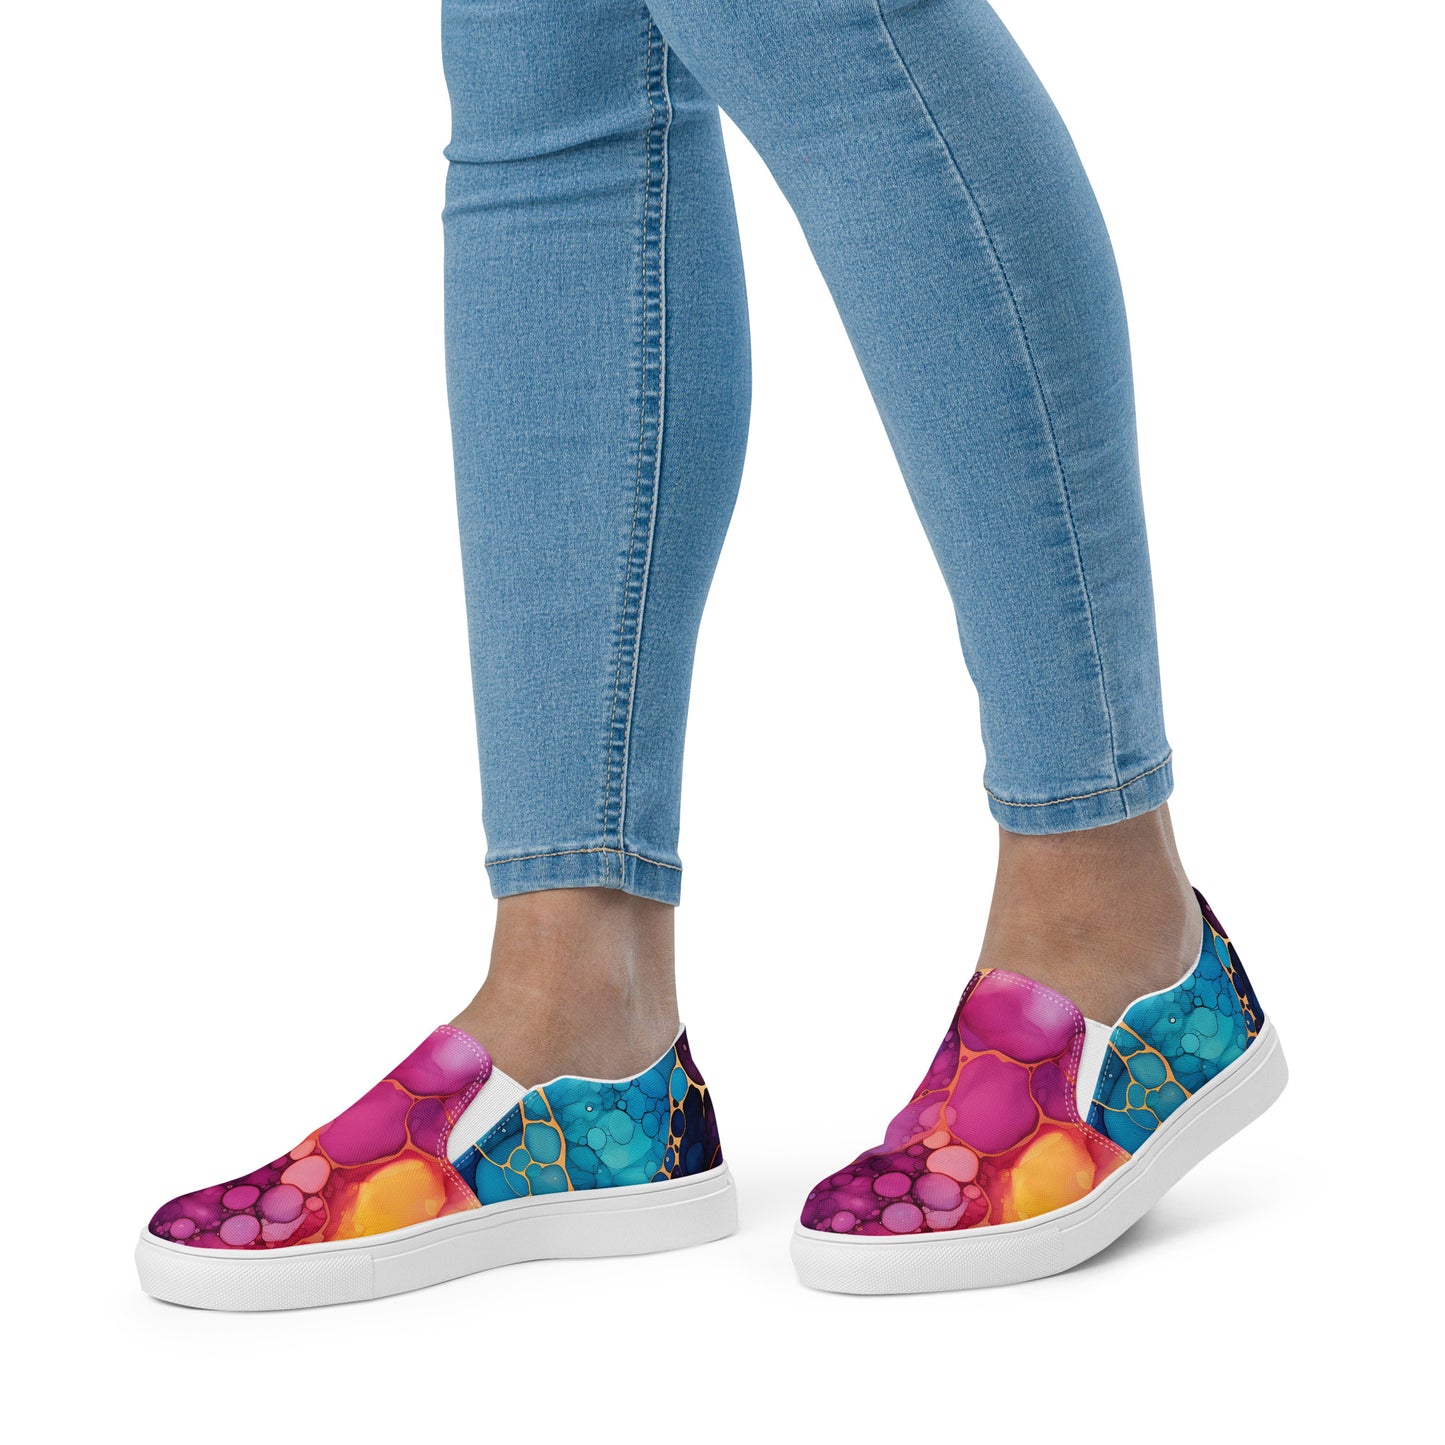 Alcohol Ink Explosion Women’s slip-on canvas shoes CedarHill Country Market